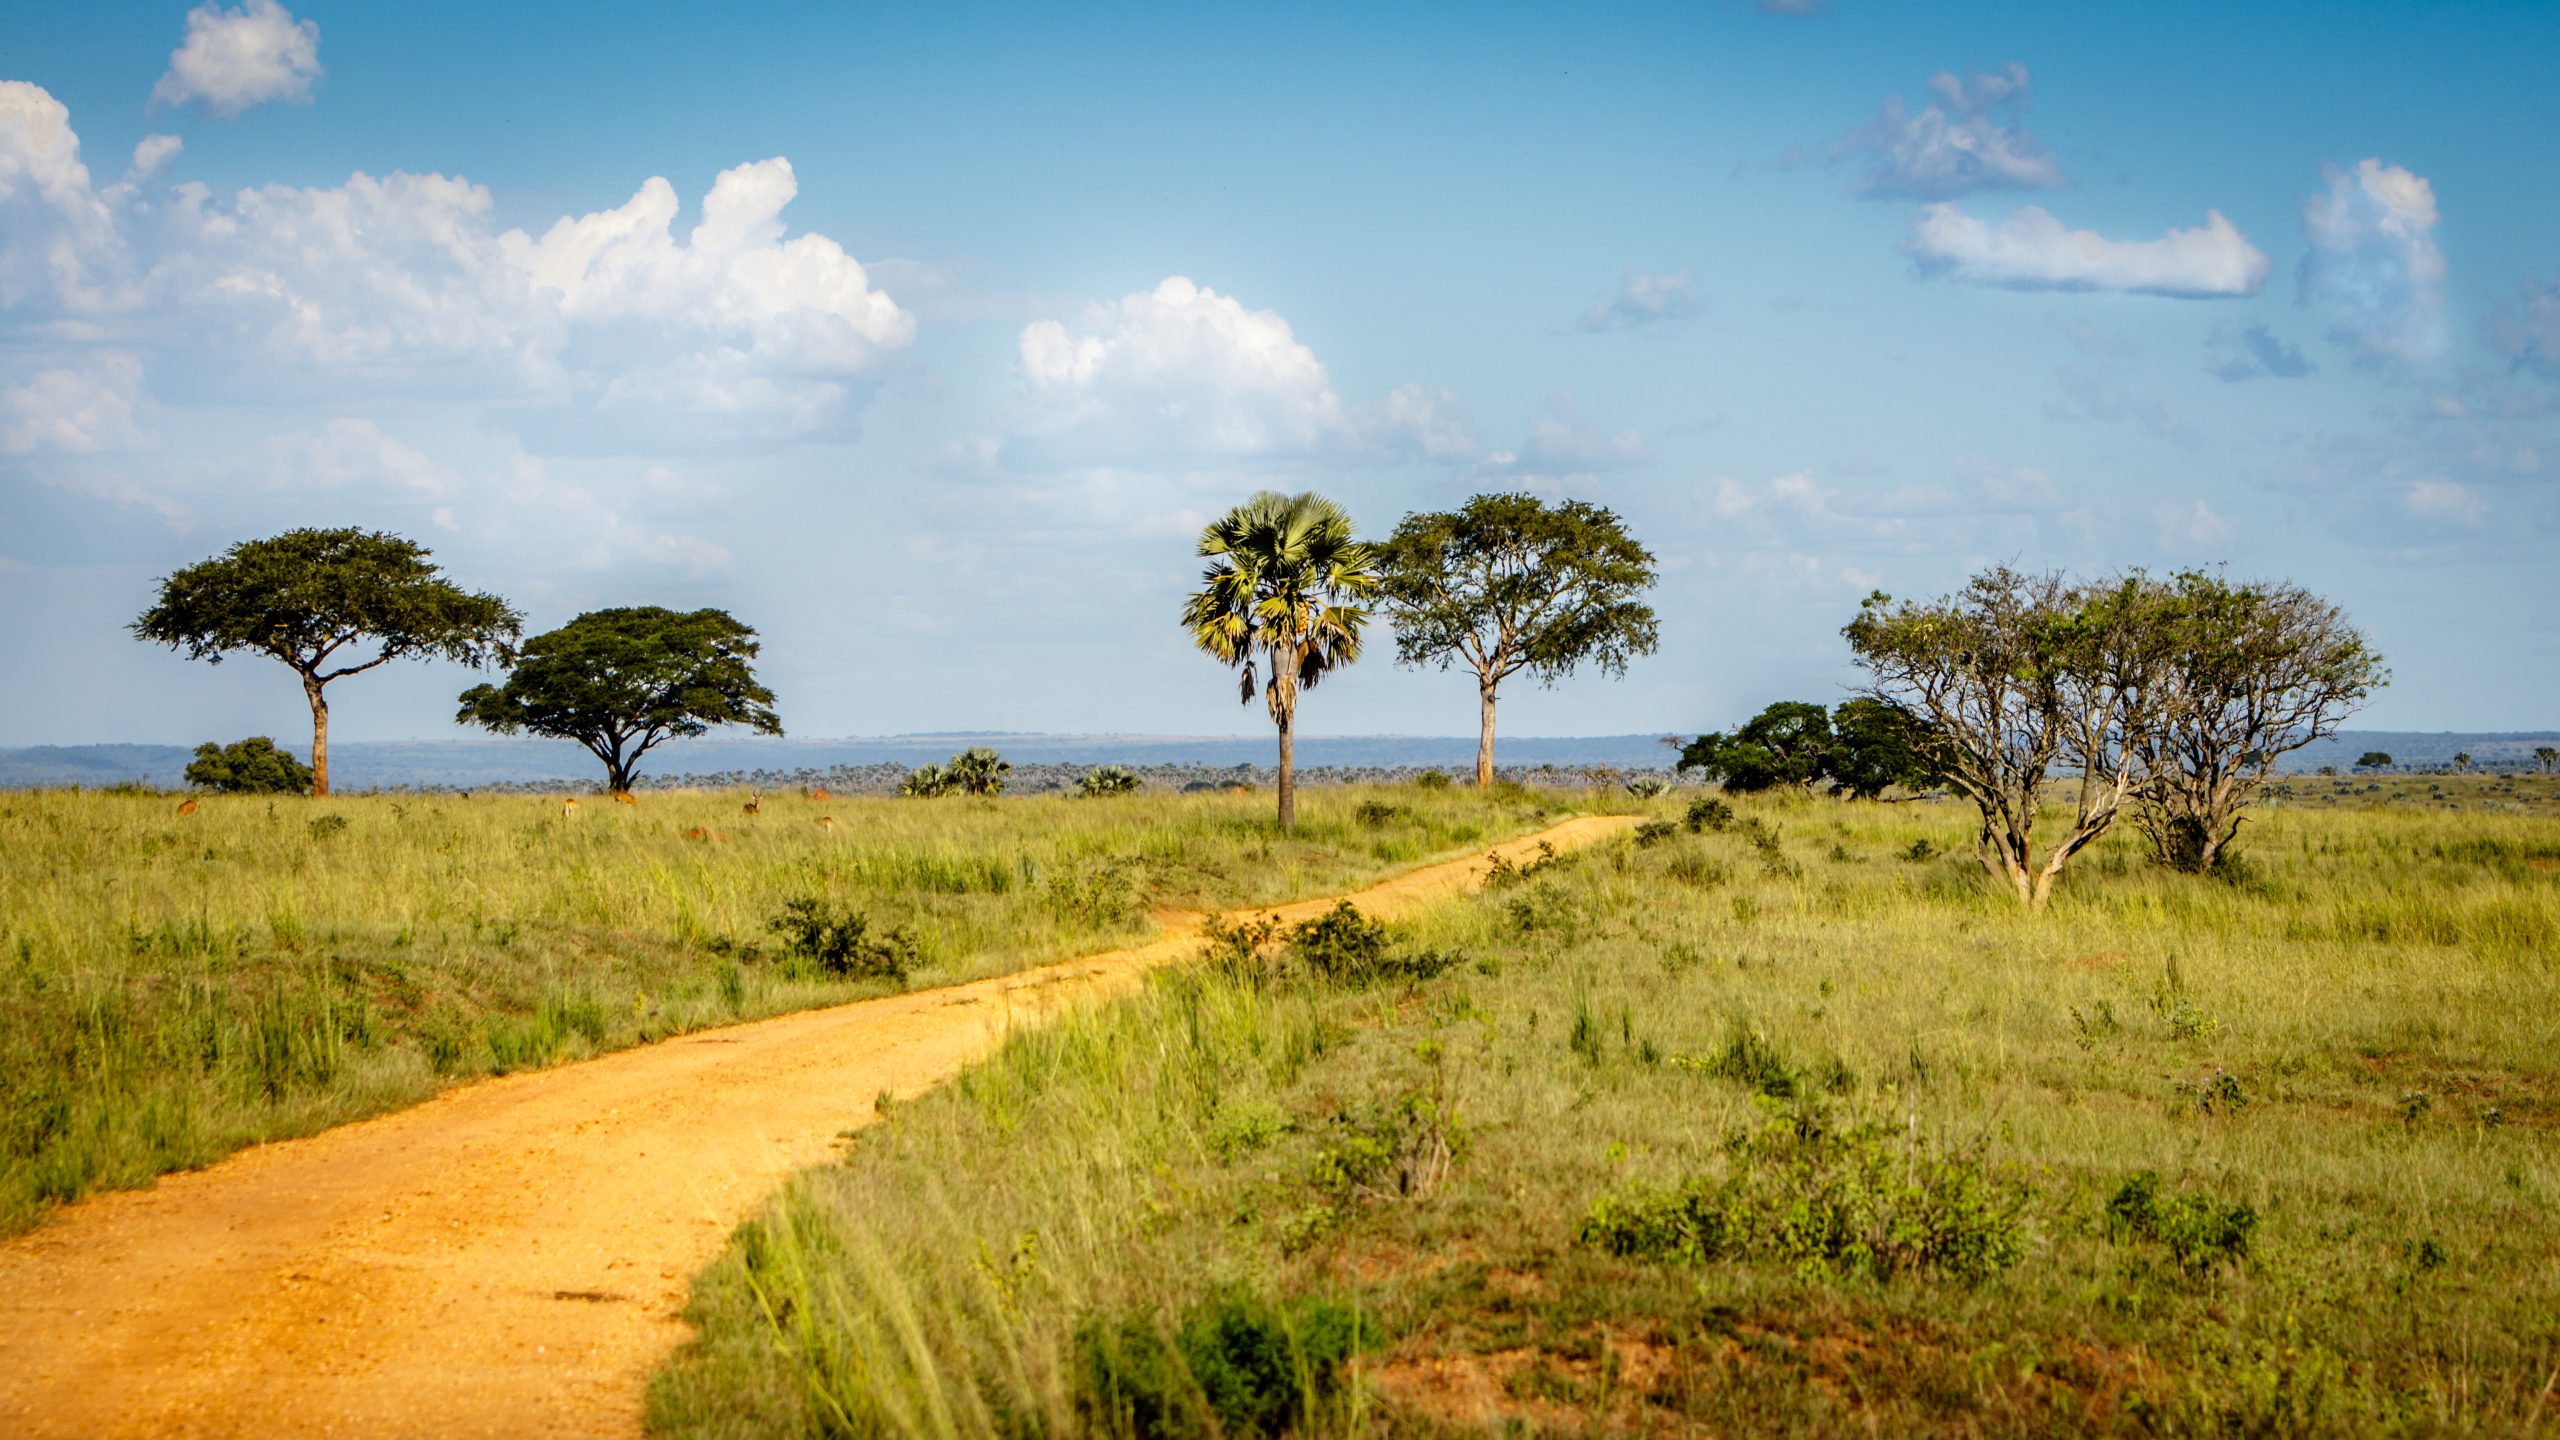 A DIRT ROAD IN THE MURCHISON FALLS NATIONAL PARK NEAR LAKE ALBERT. OIL DRILLING WILL BE HAPPENING NEAR THIS ROAD.